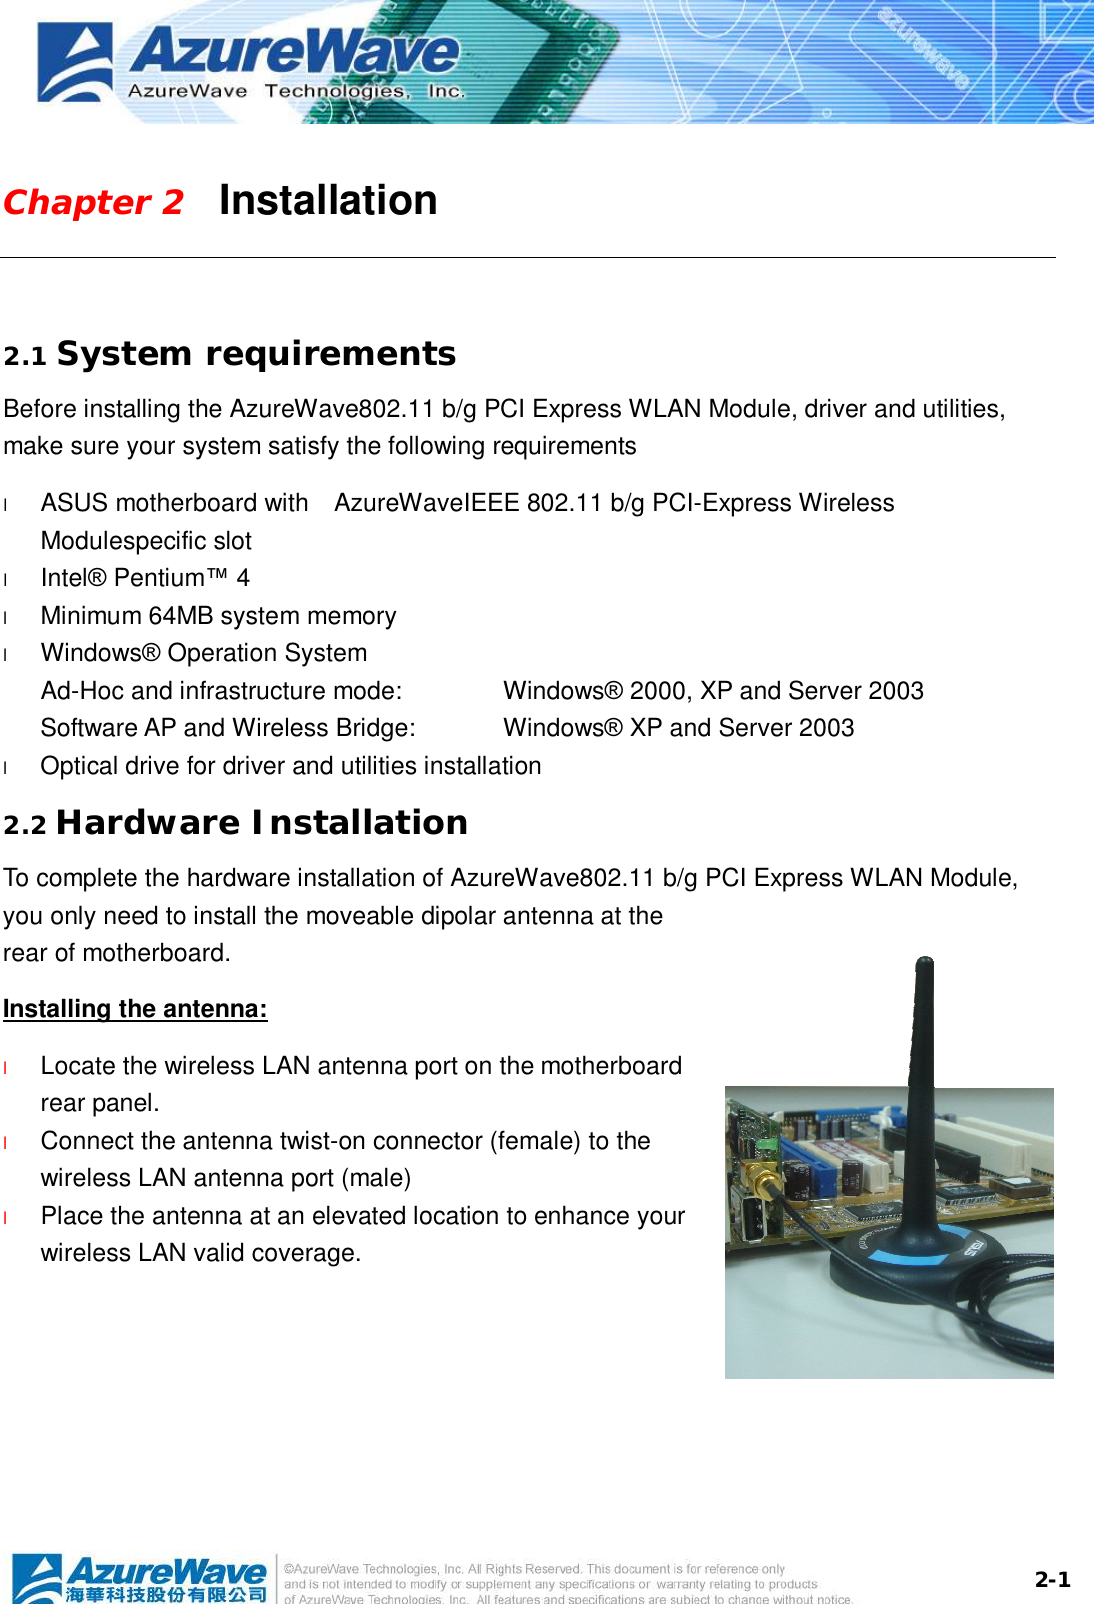  2-1Chapter 2   Installation  2.1 System requirements Before installing the AzureWave802.11 b/g PCI Express WLAN Module, driver and utilities, make sure your system satisfy the following requirements l  ASUS motherboard with  AzureWaveIEEE 802.11 b/g PCI-Express Wireless Modulespecific slot l  Intel® Pentium™ 4 l  Minimum 64MB system memory l  Windows® Operation System Ad-Hoc and infrastructure mode:   Windows® 2000, XP and Server 2003 Software AP and Wireless Bridge:  Windows® XP and Server 2003 l  Optical drive for driver and utilities installation 2.2 Hardware Installation To complete the hardware installation of AzureWave802.11 b/g PCI Express WLAN Module, you only need to install the moveable dipolar antenna at the rear of motherboard. Installing the antenna: l  Locate the wireless LAN antenna port on the motherboard rear panel.  l  Connect the antenna twist-on connector (female) to the wireless LAN antenna port (male) l  Place the antenna at an elevated location to enhance your wireless LAN valid coverage.    